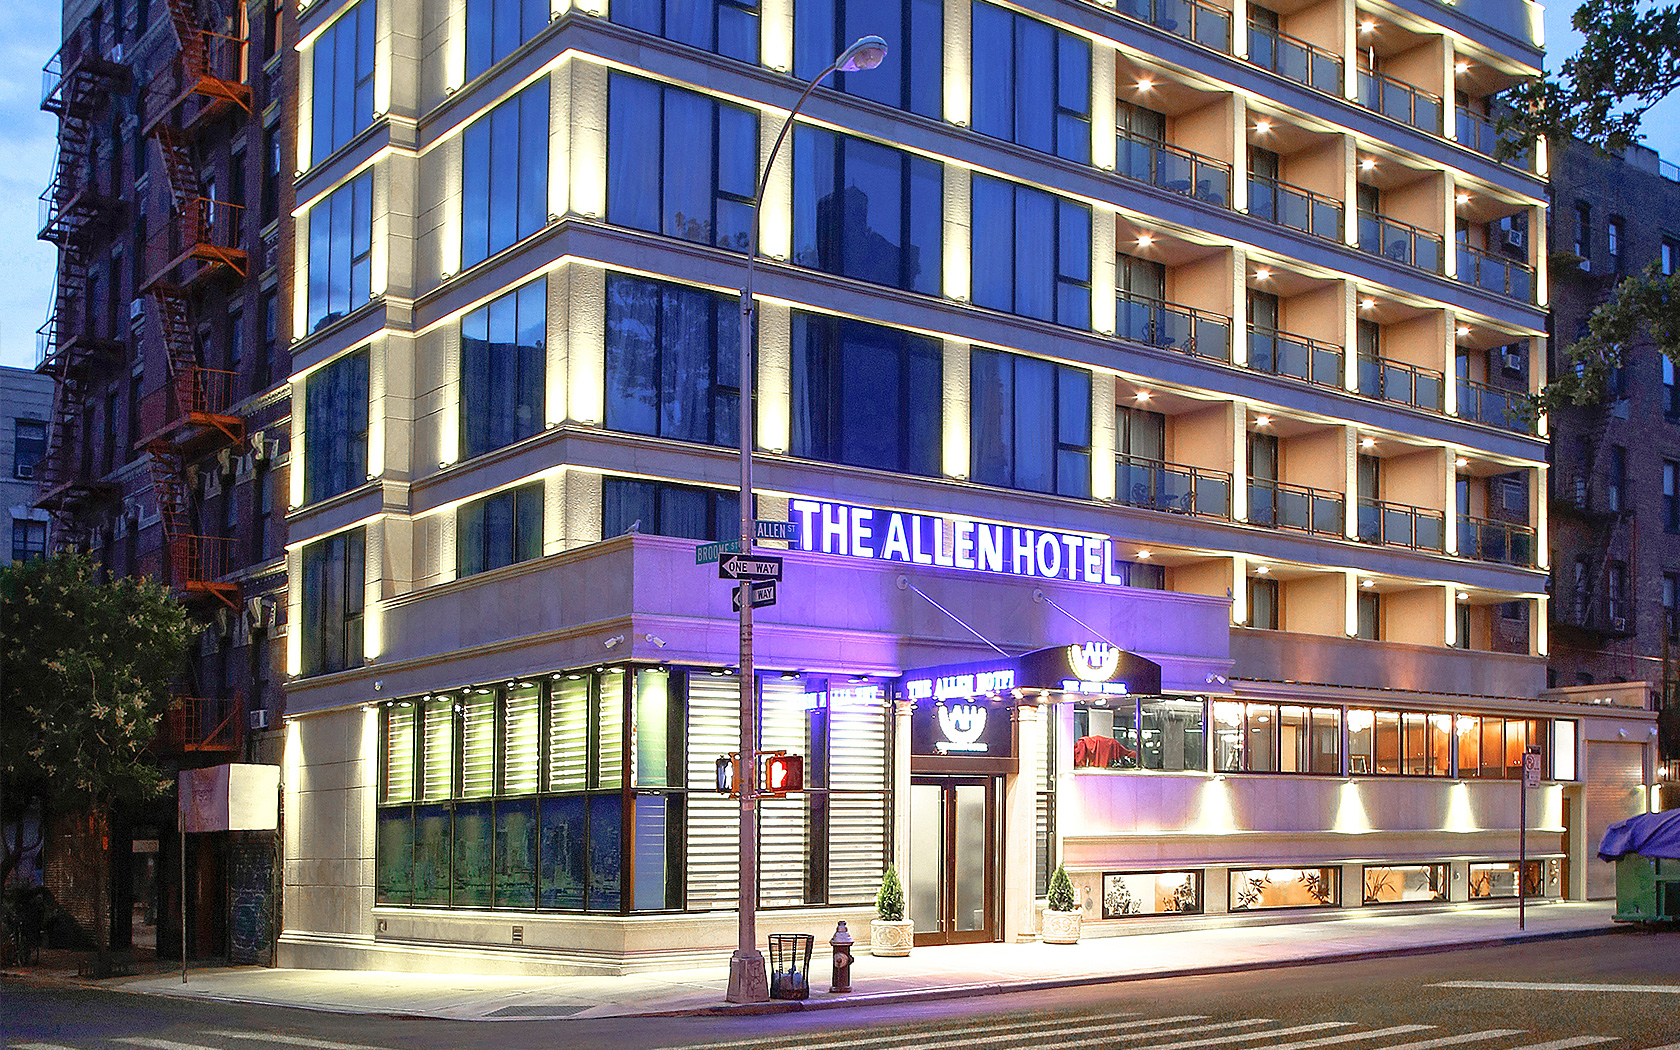 The Allen hotel entrance exterior at night